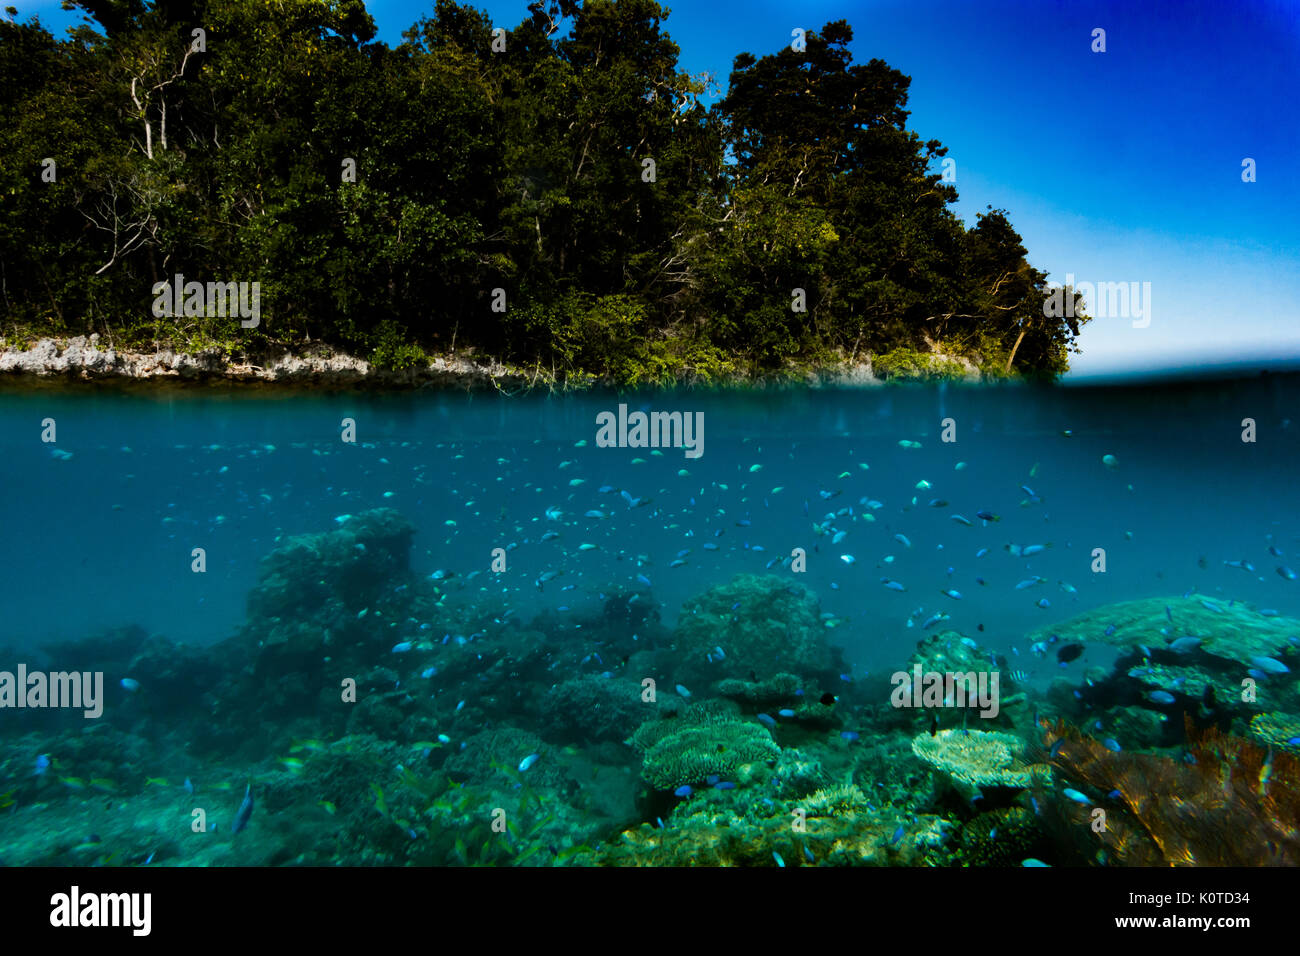 Snorkeling and underwater photography in the karst topography of the Bay of Islands, Vanua Balavu, Lau group, Fiji Stock Photo